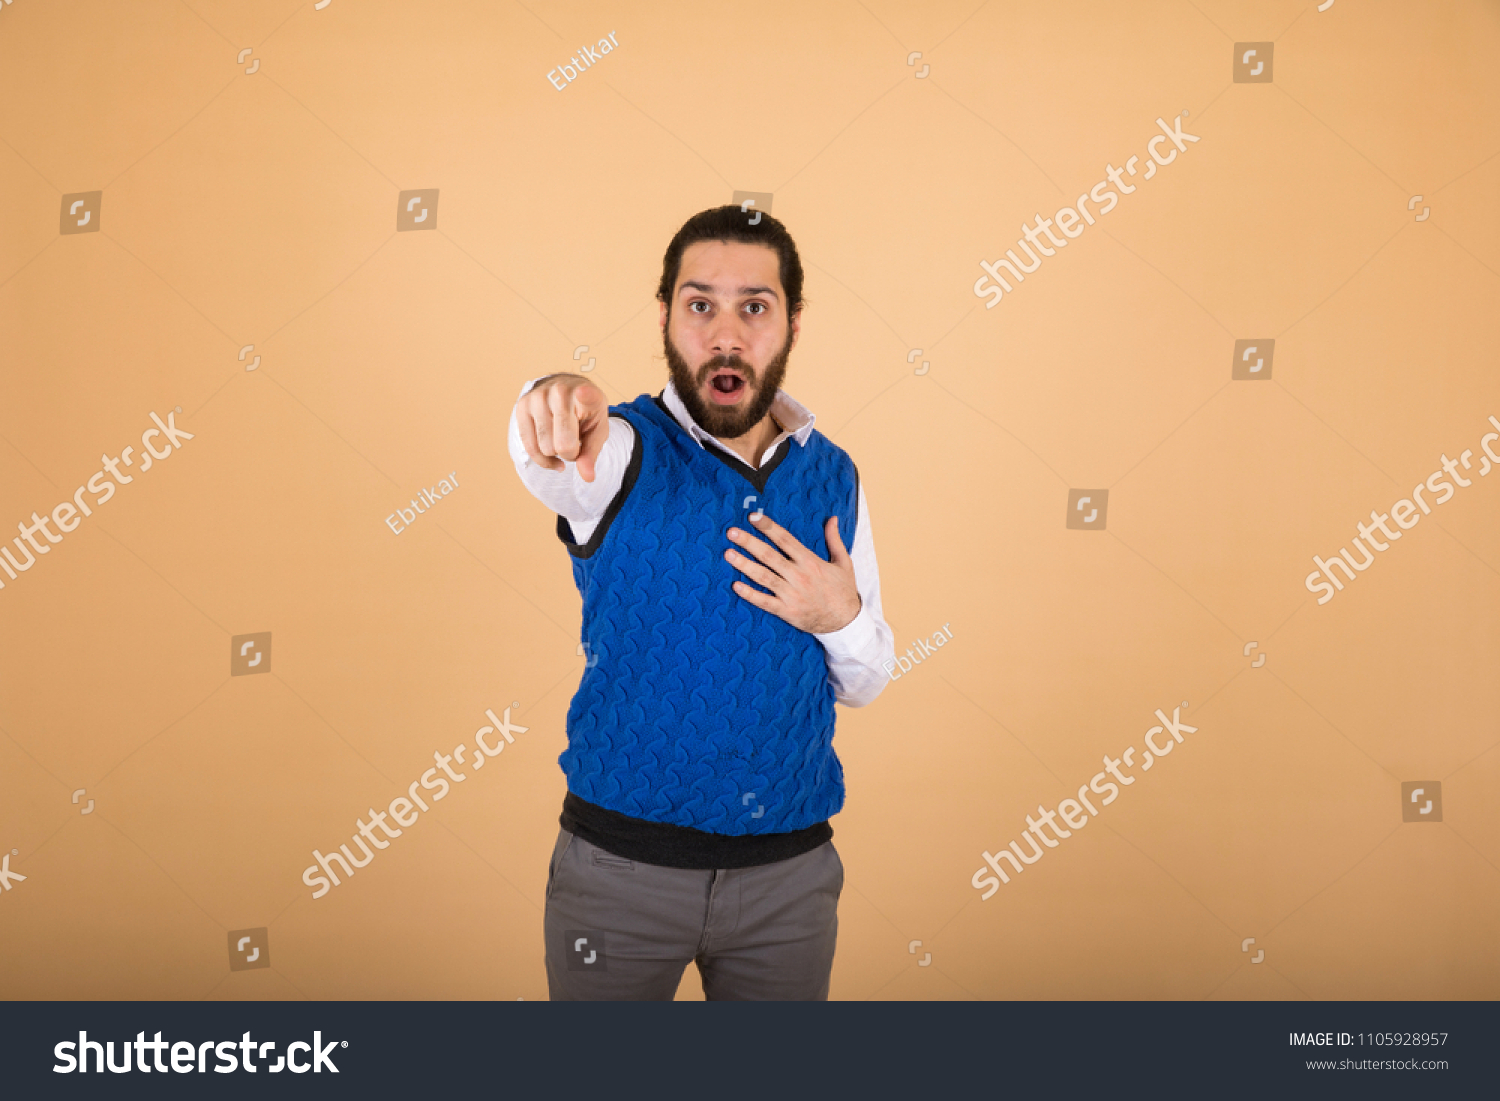 young man shocked and pointing at something and looking to the camera , in an orange background #1105928957